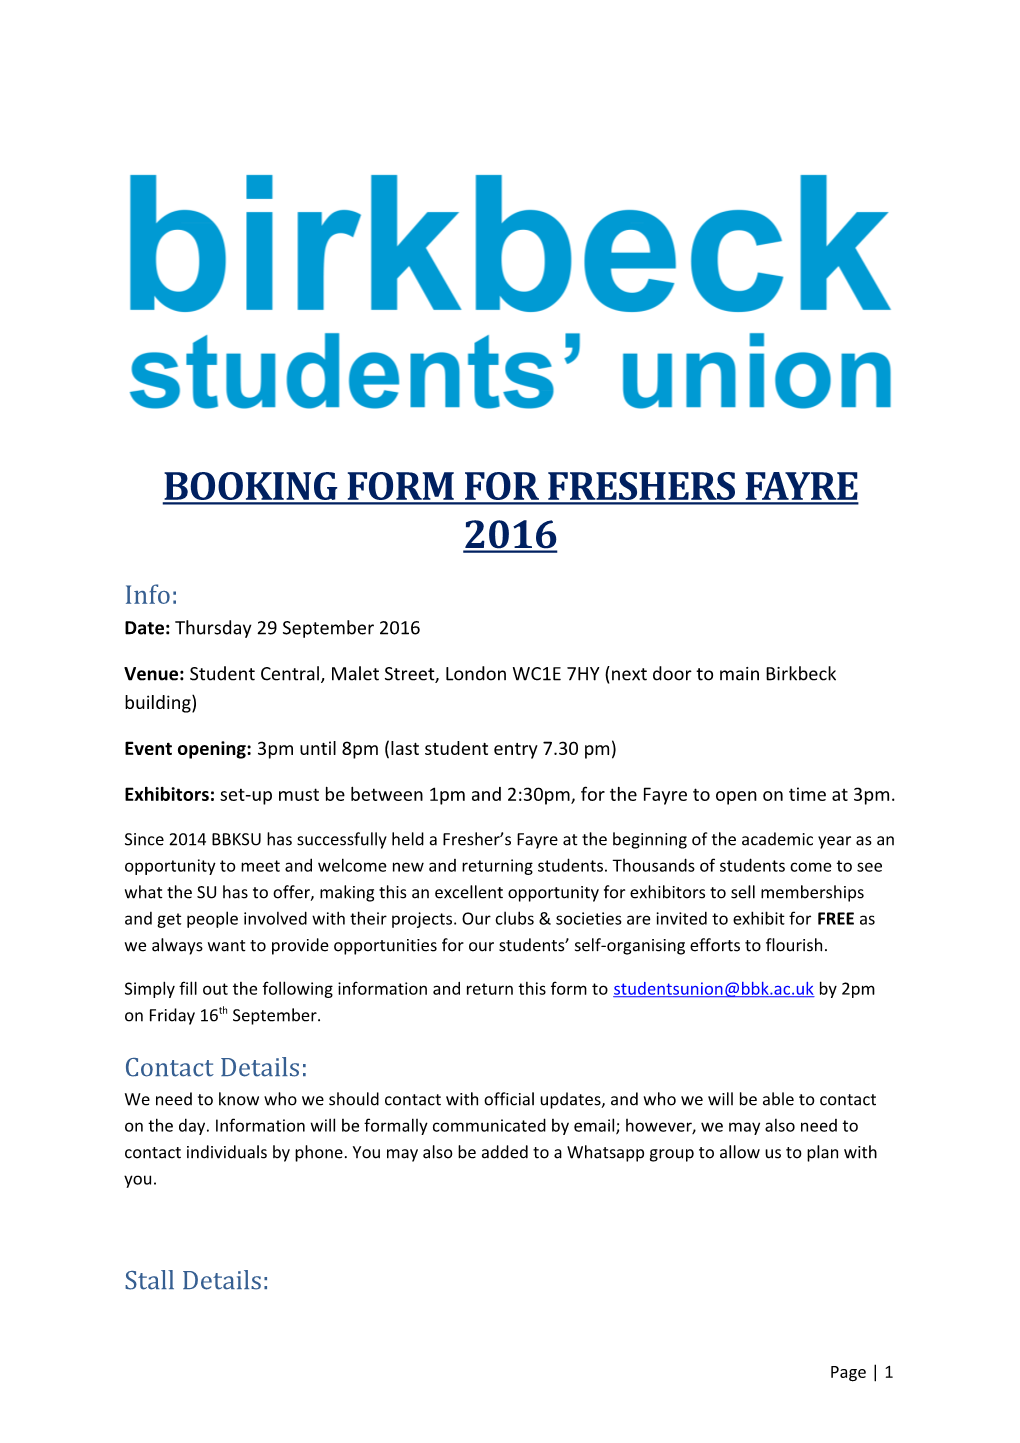 Booking Form for Freshers Fayre 2016